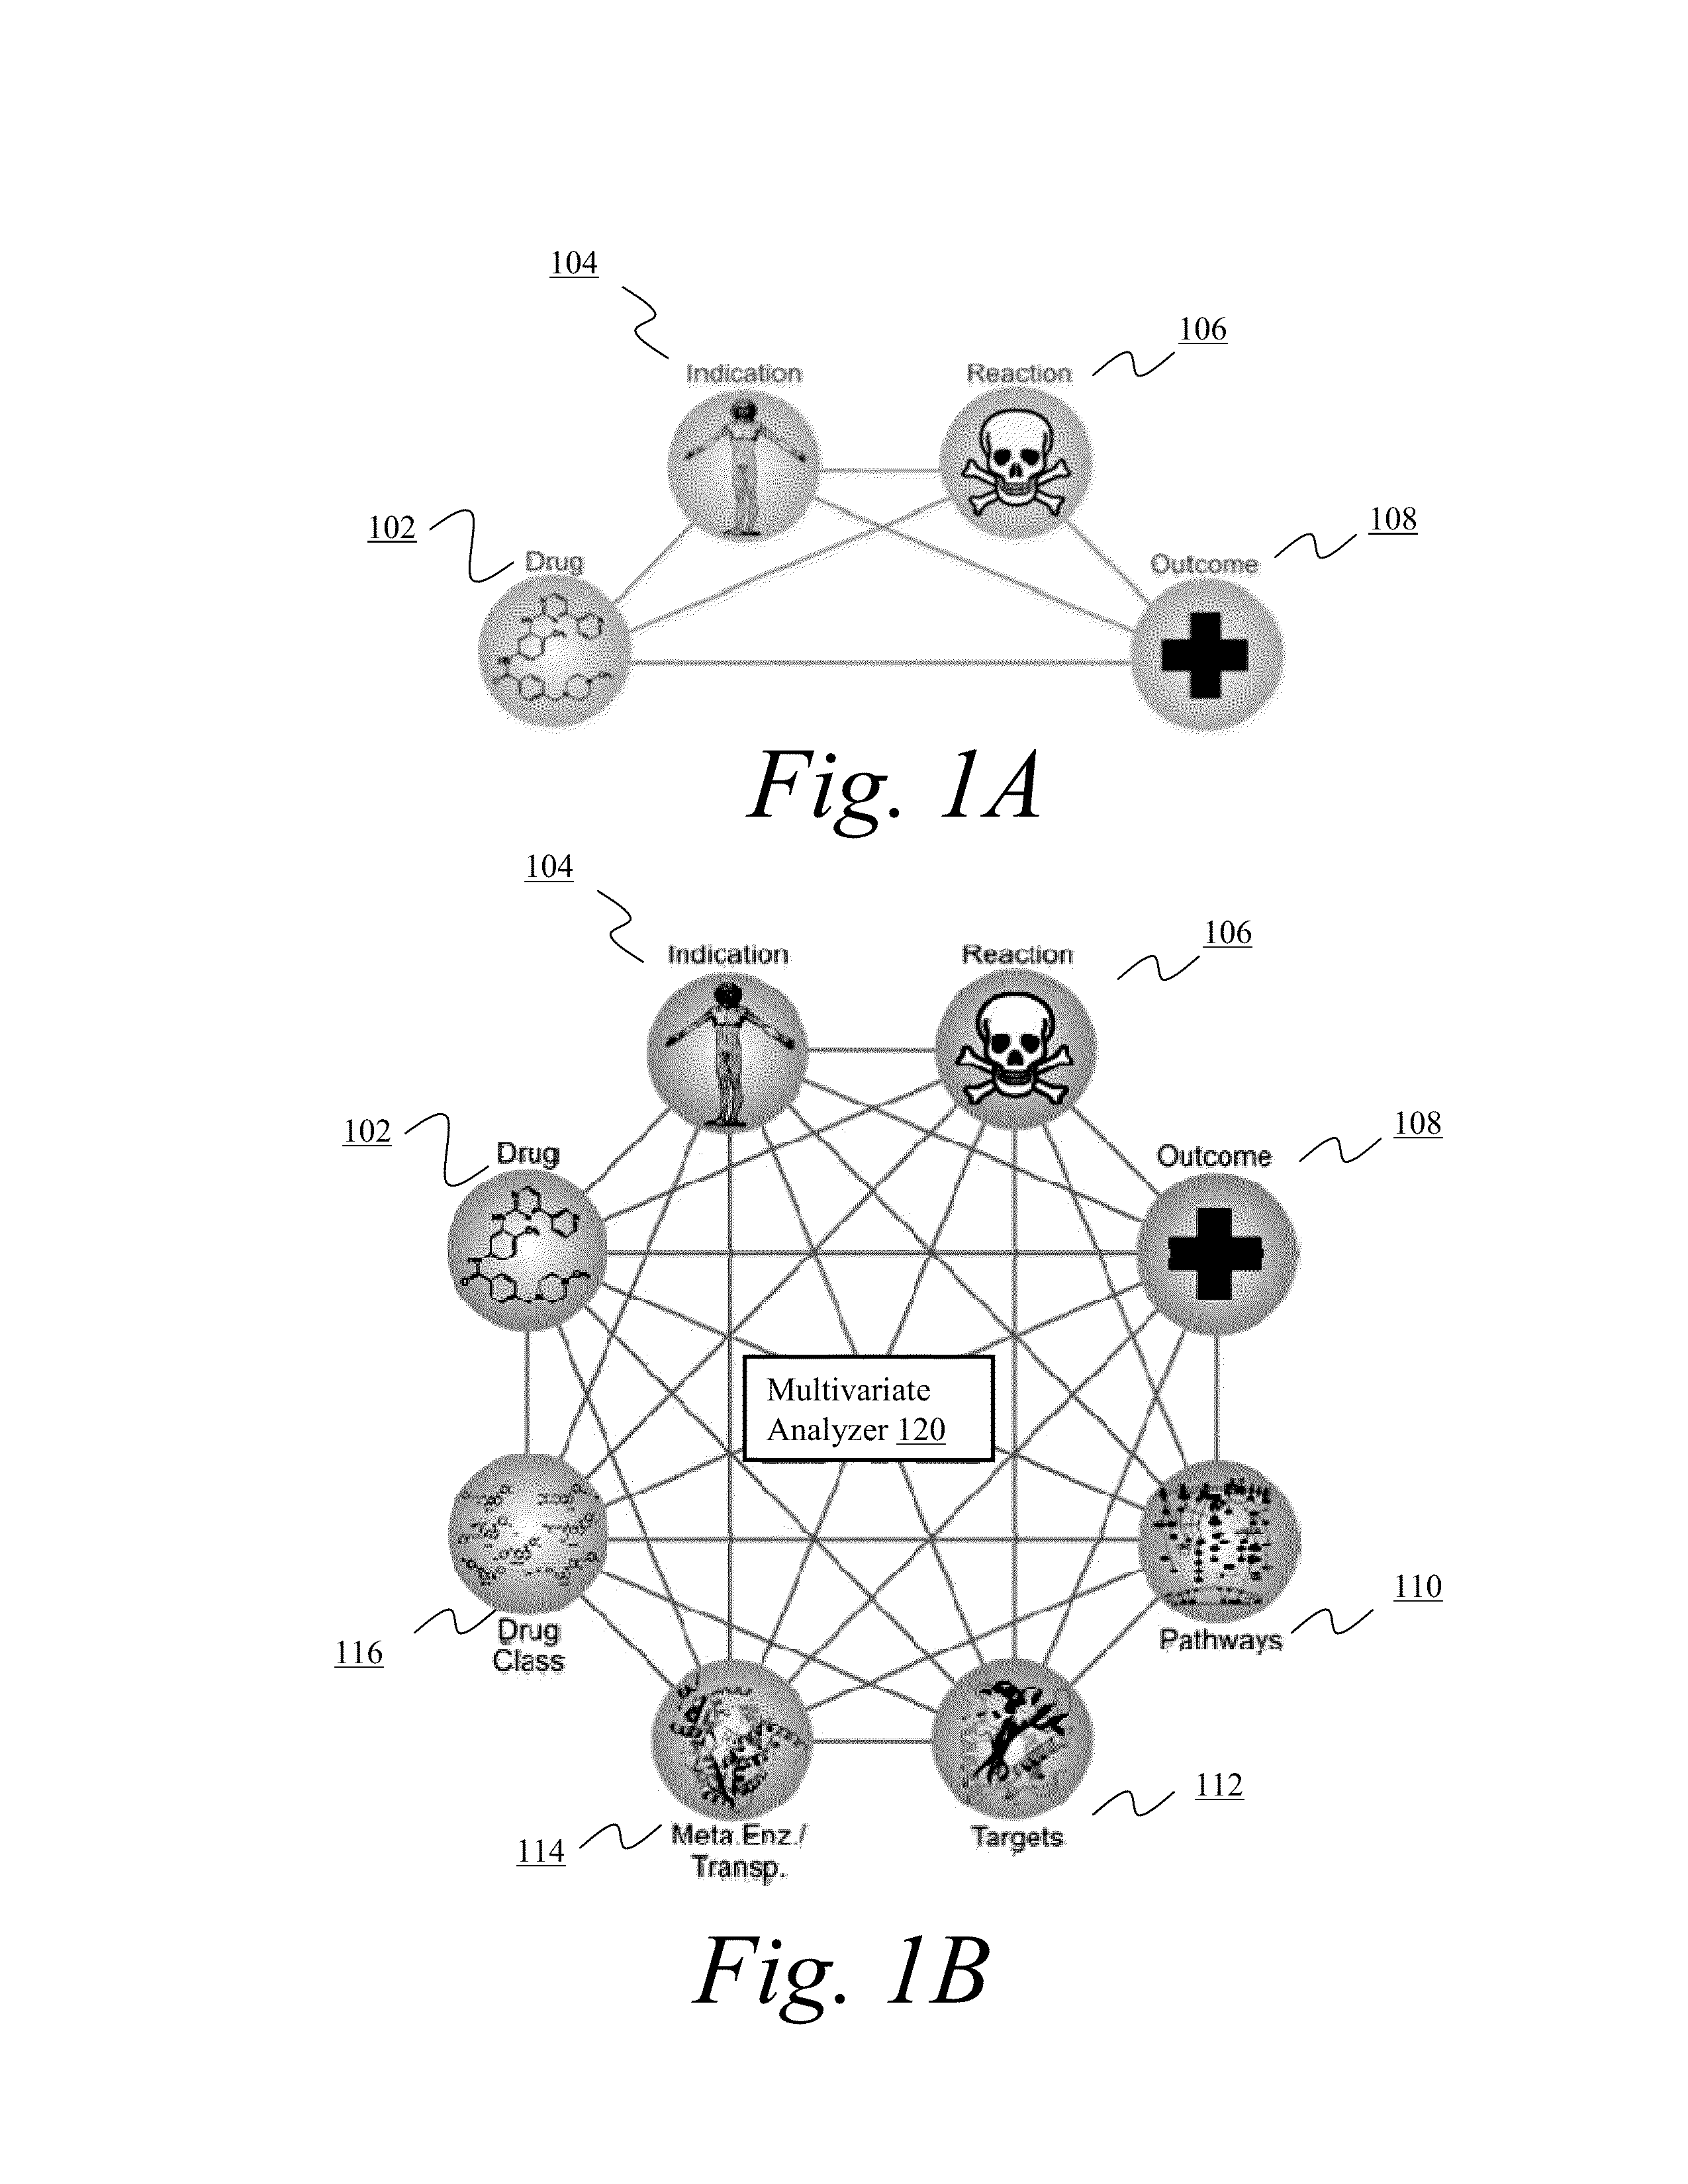 Systems and methods for using adverse event data to predict potential side effects